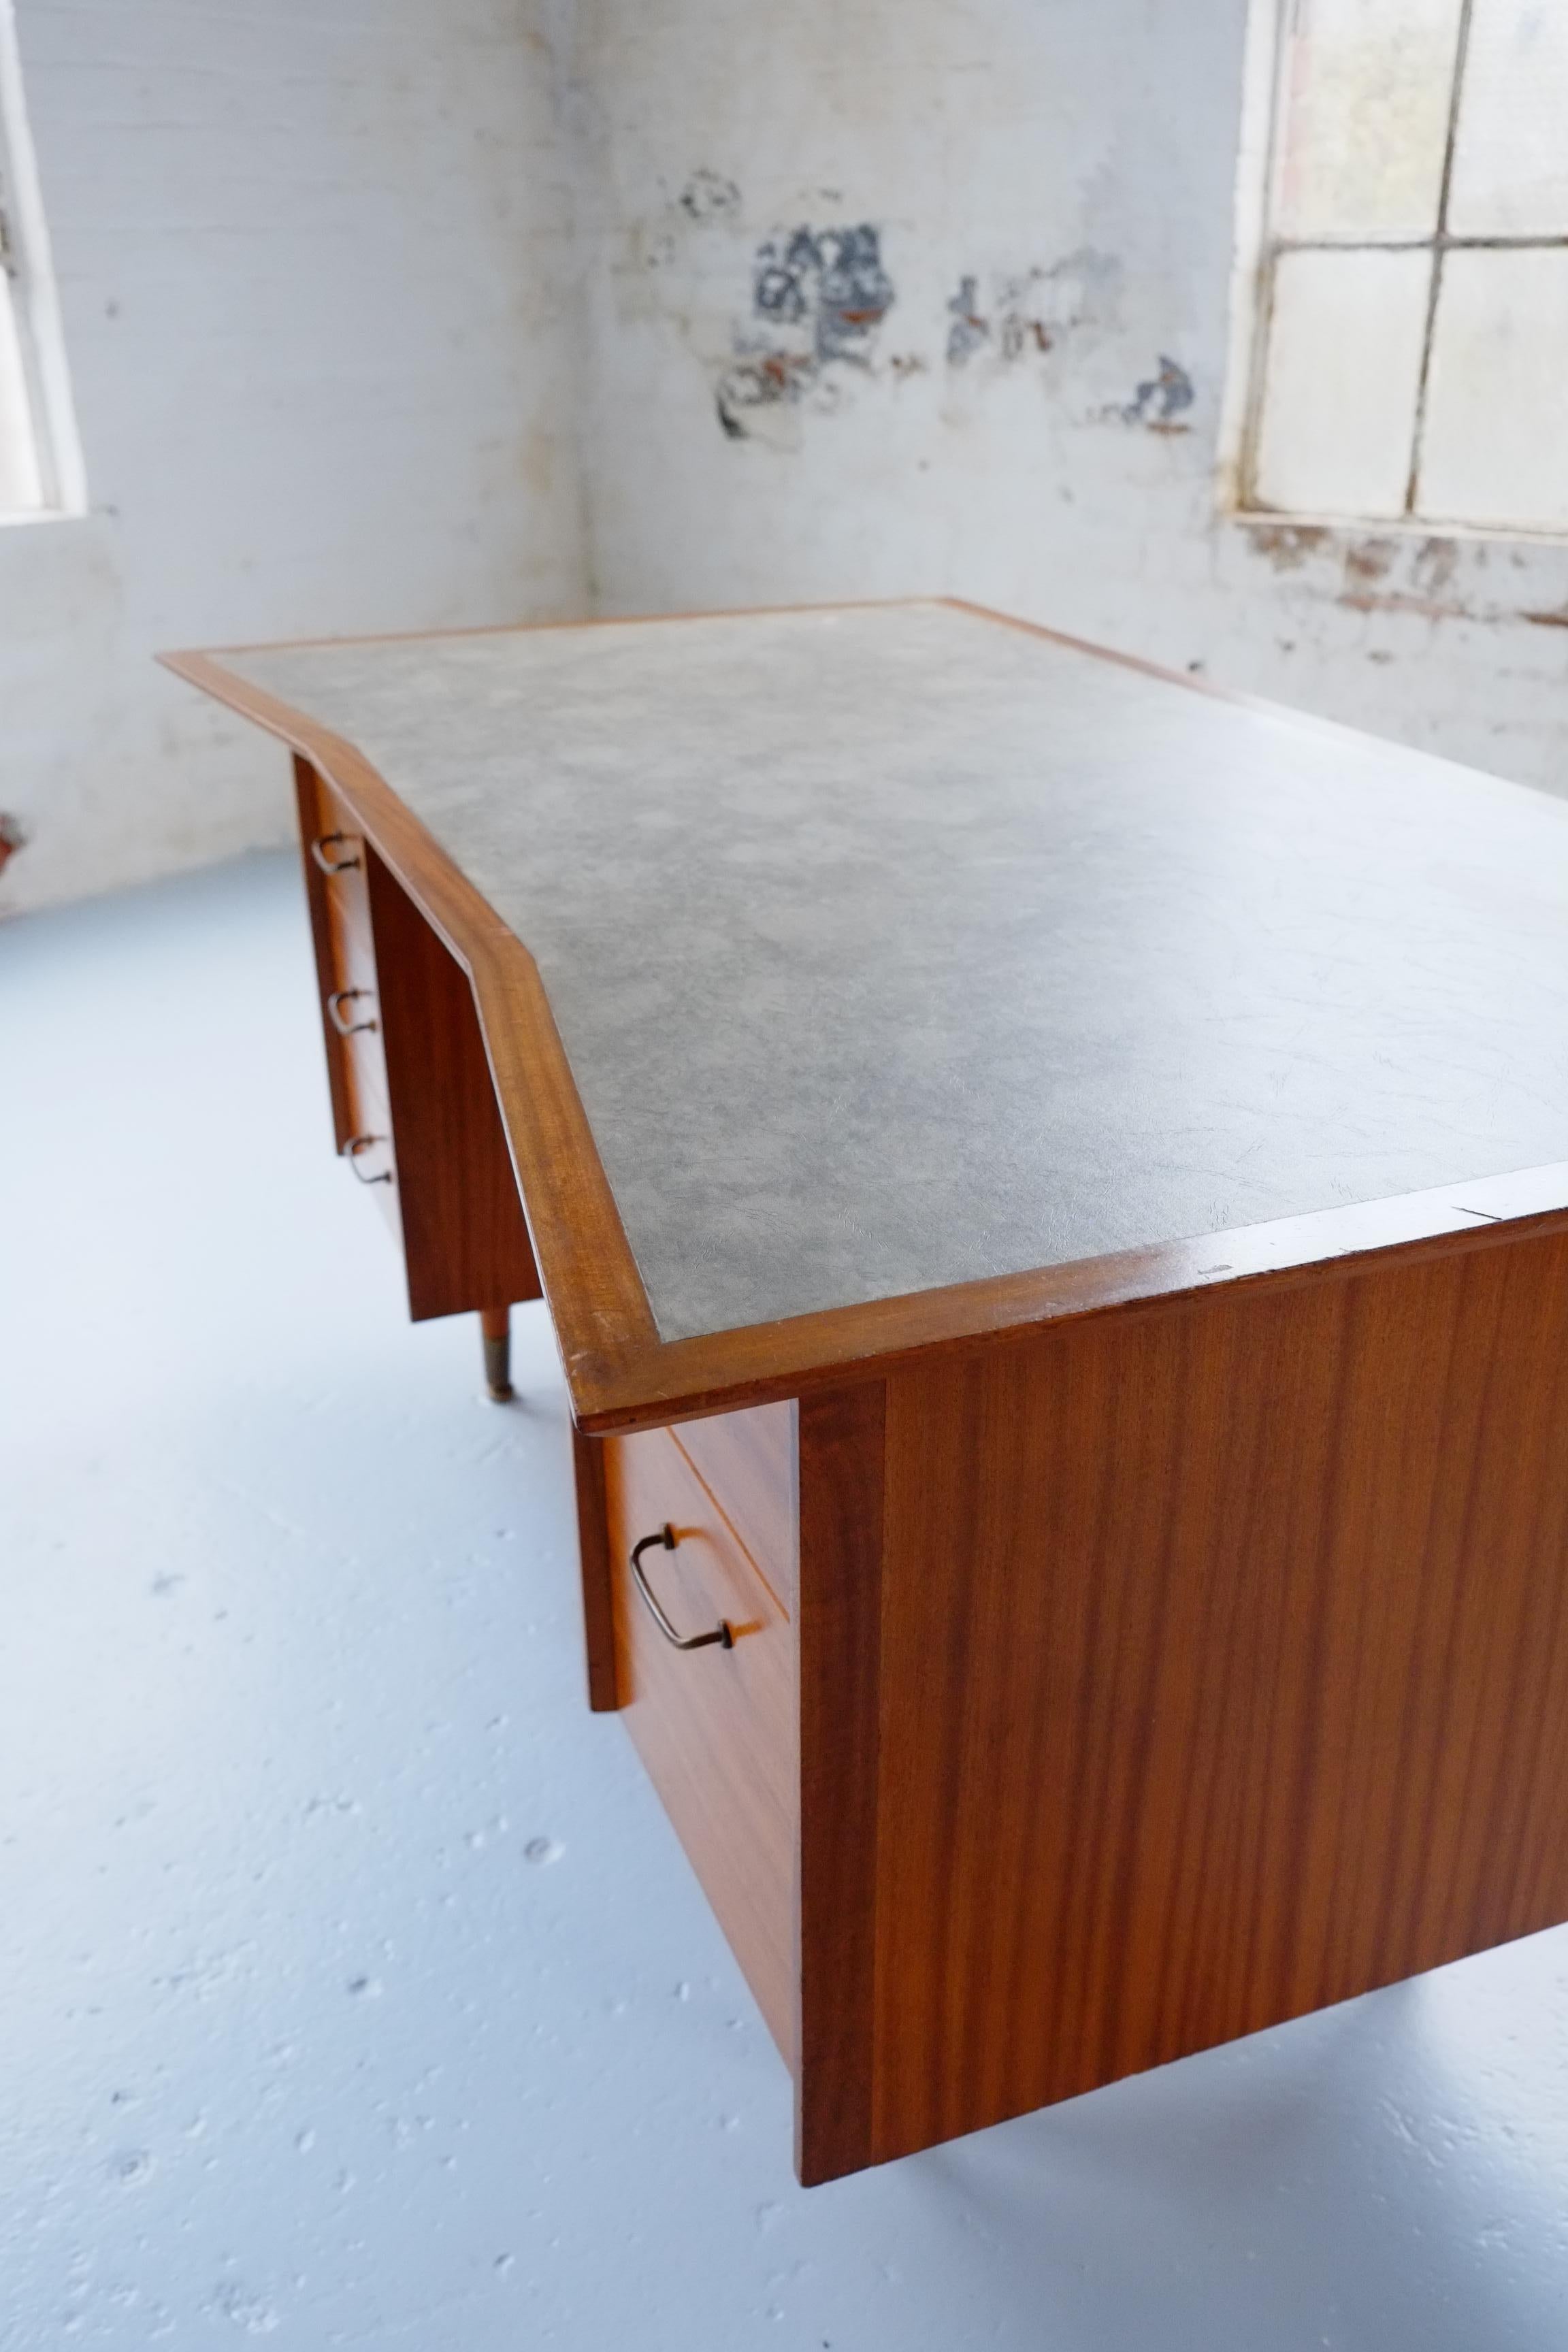 Mid-20th Century Large Mid Century Modern Desk with Curved Front and Brass Handles 50's 60's For Sale